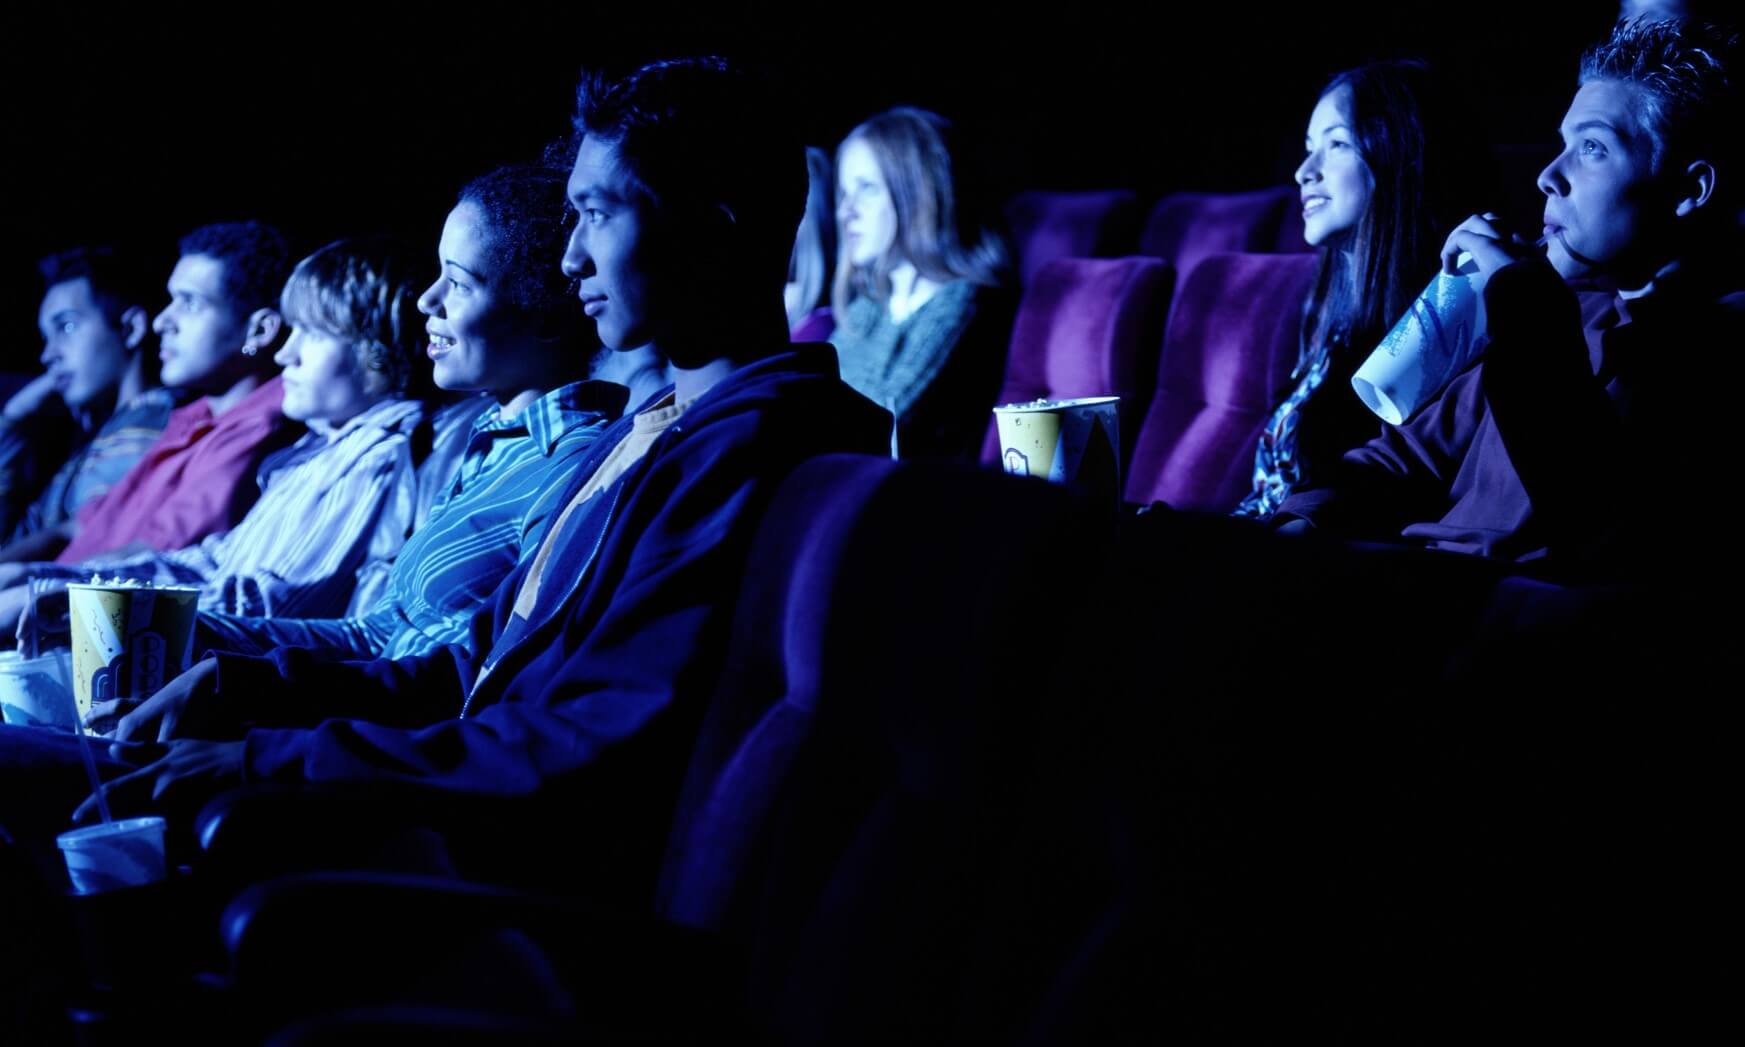 Group of young people watching movie, side view